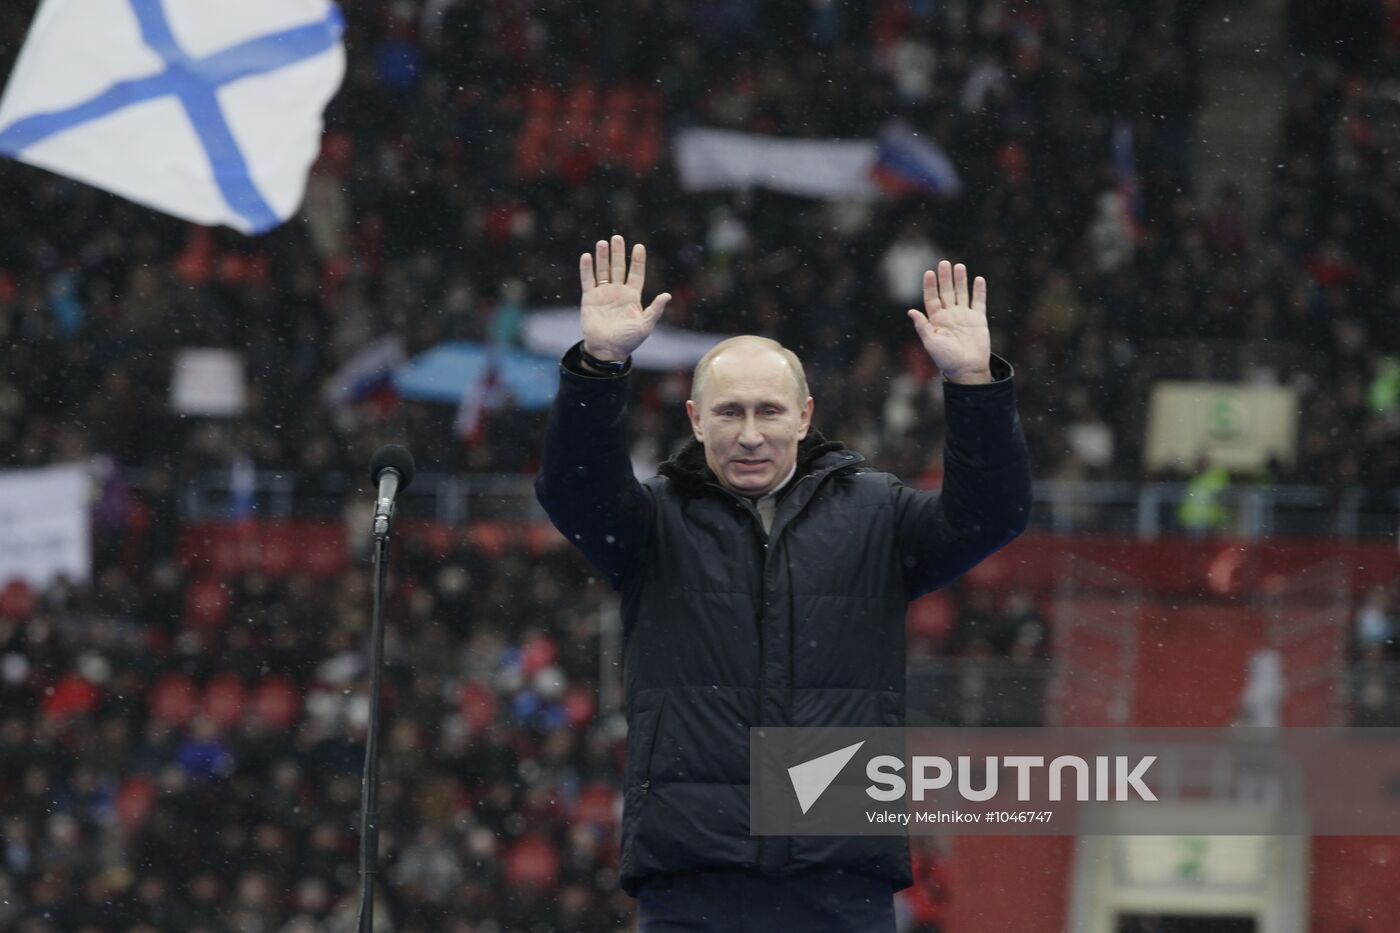 Putin speaks to his supporters at "Defend the Nation!" rally